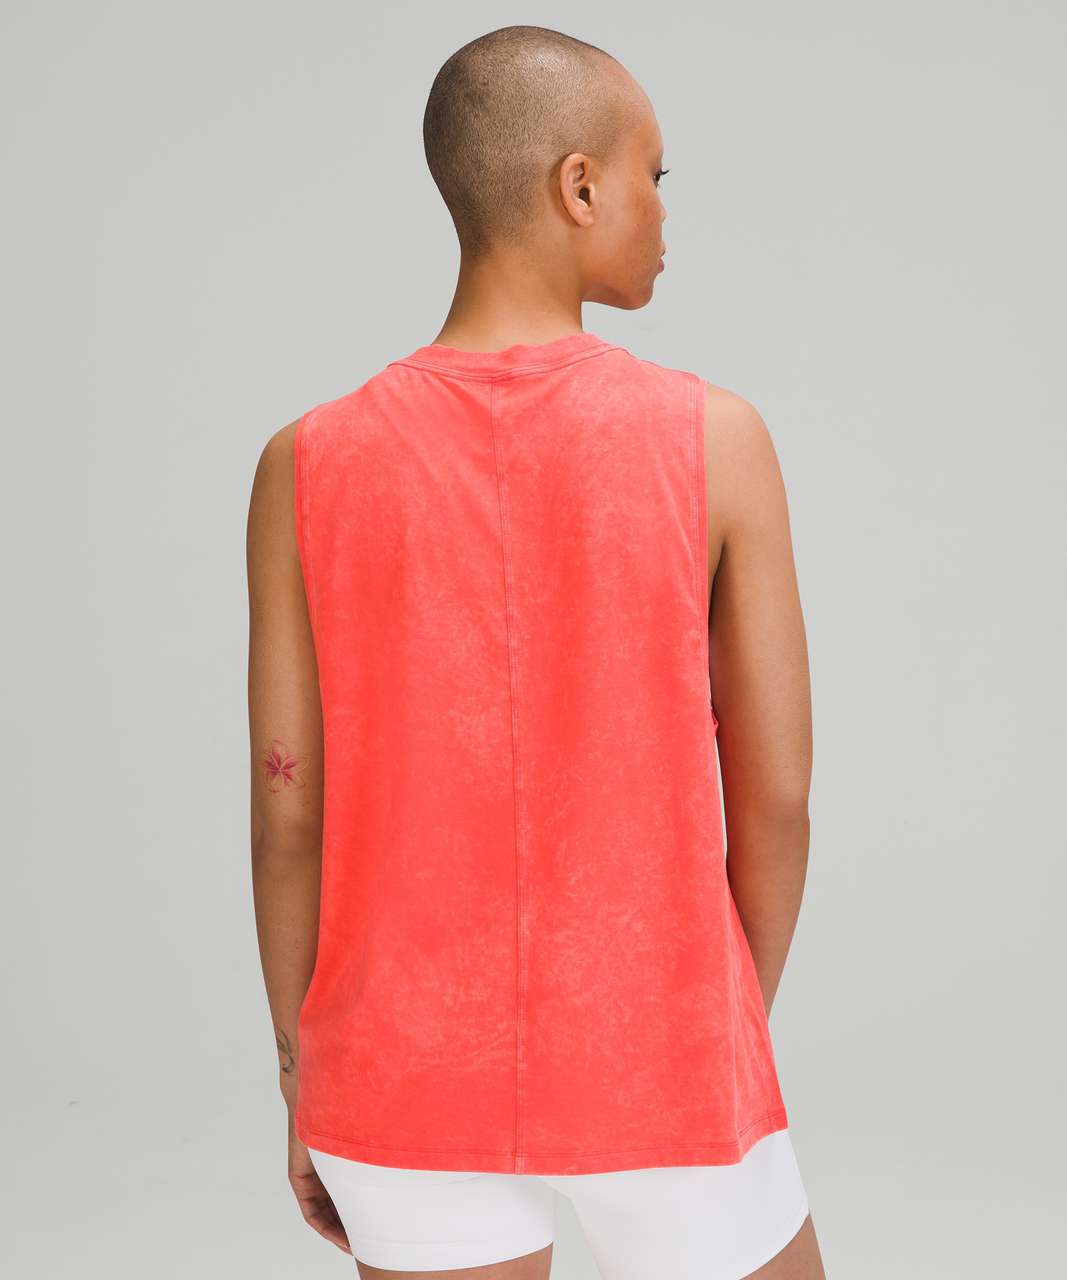 Lululemon All Yours Tank Top - Cloudy Wash Flare